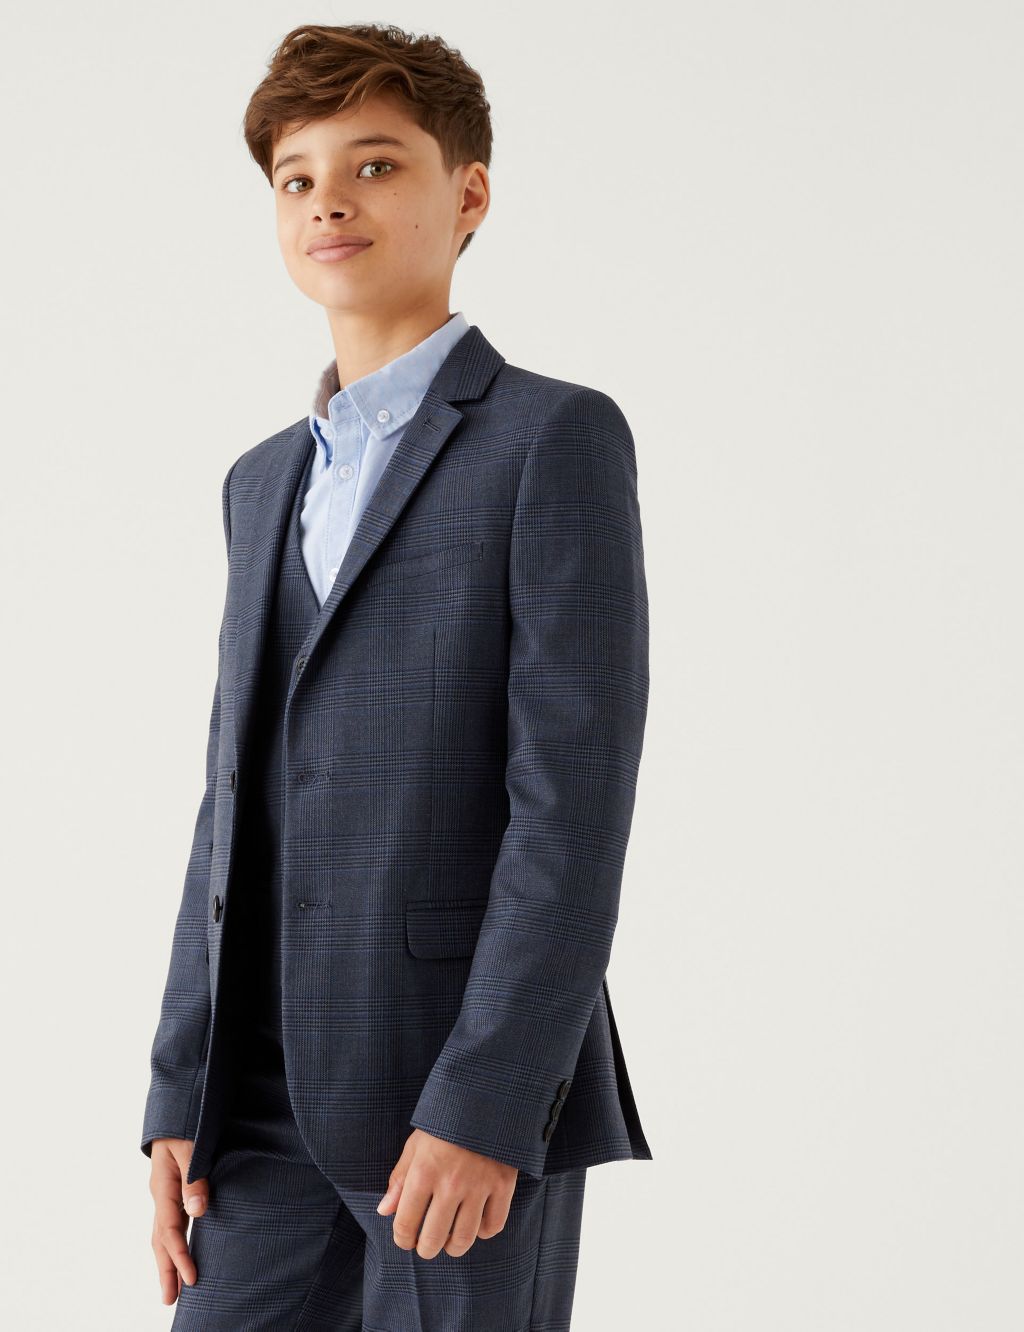 Page 3 - Boys' Clothes | M&S